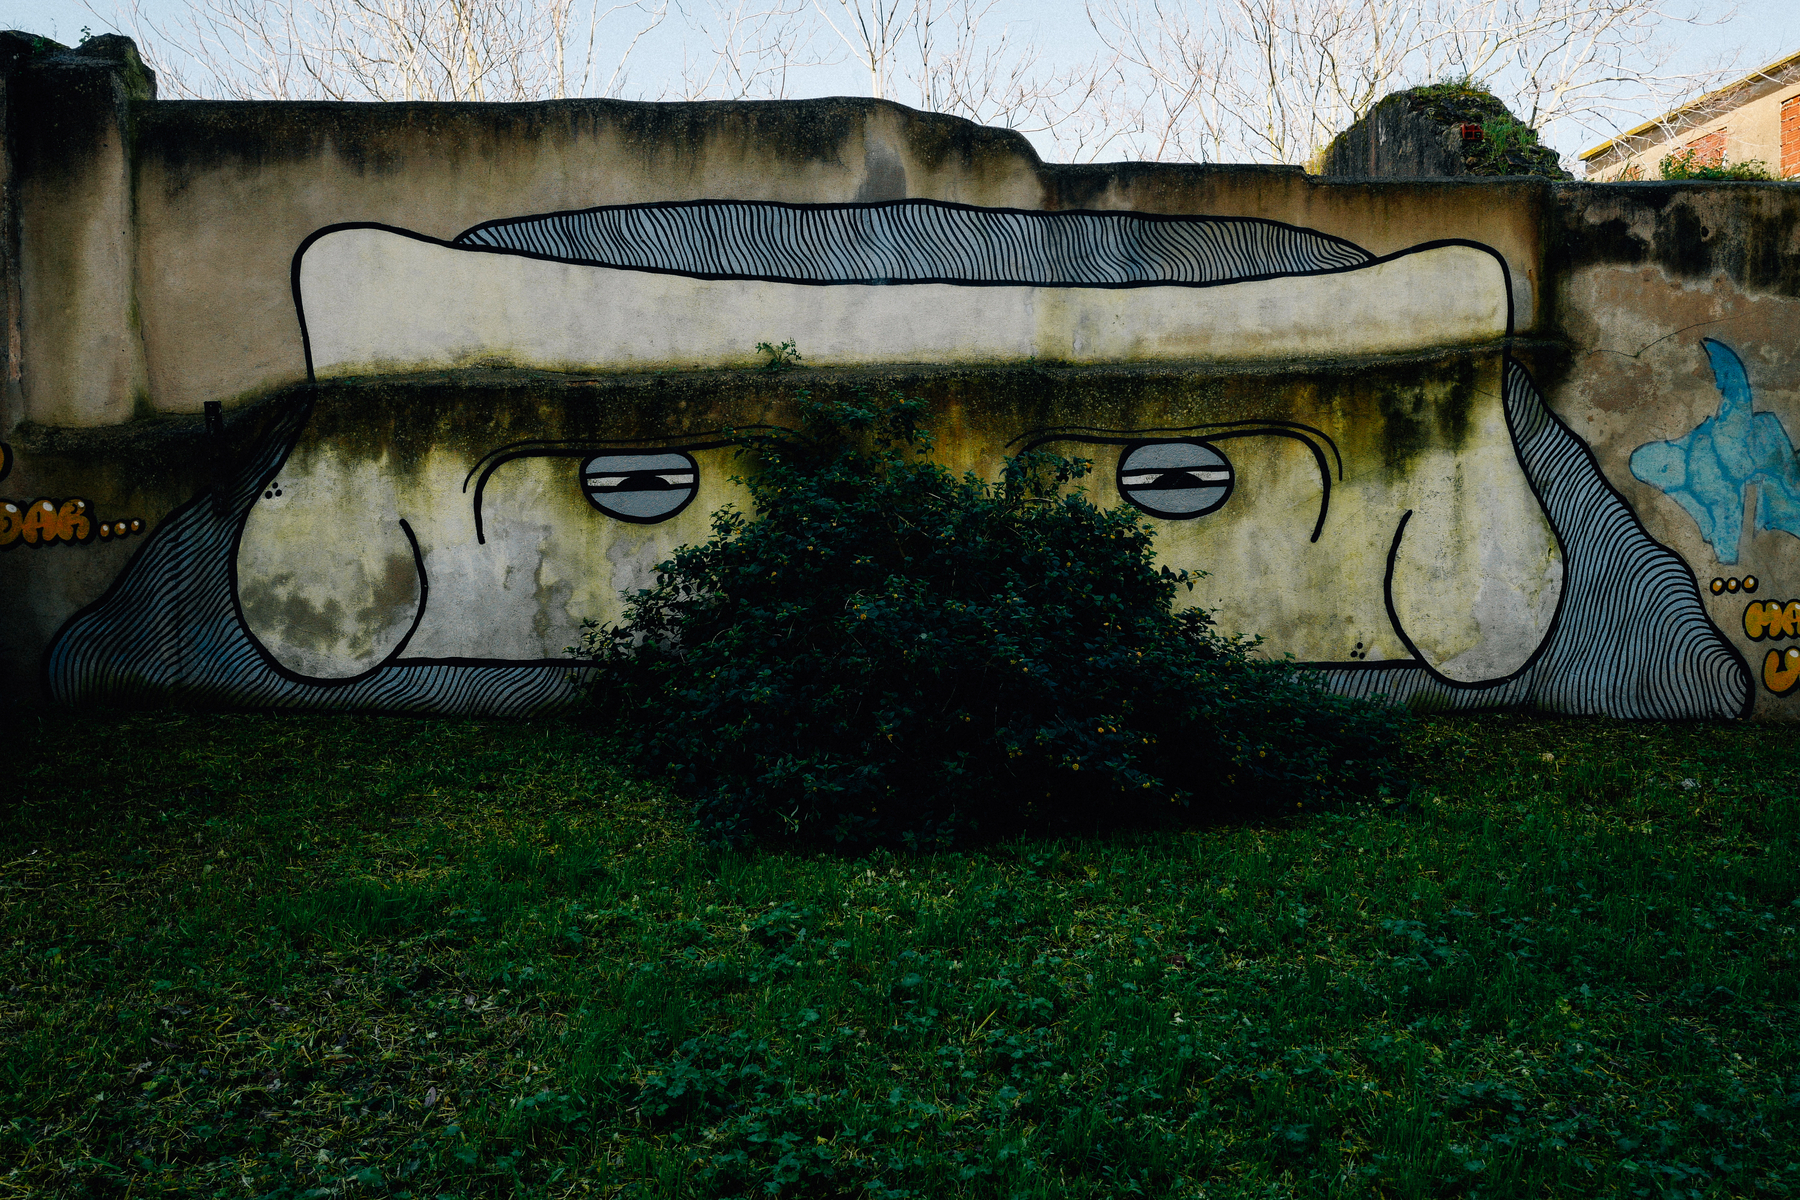 Graffiti on a wall depicting a stylized face with squinted eyes and a flat, straight-lined mouth integrated into the wall’s architecture above a bush, creating the appearance of a large face with a moustache.